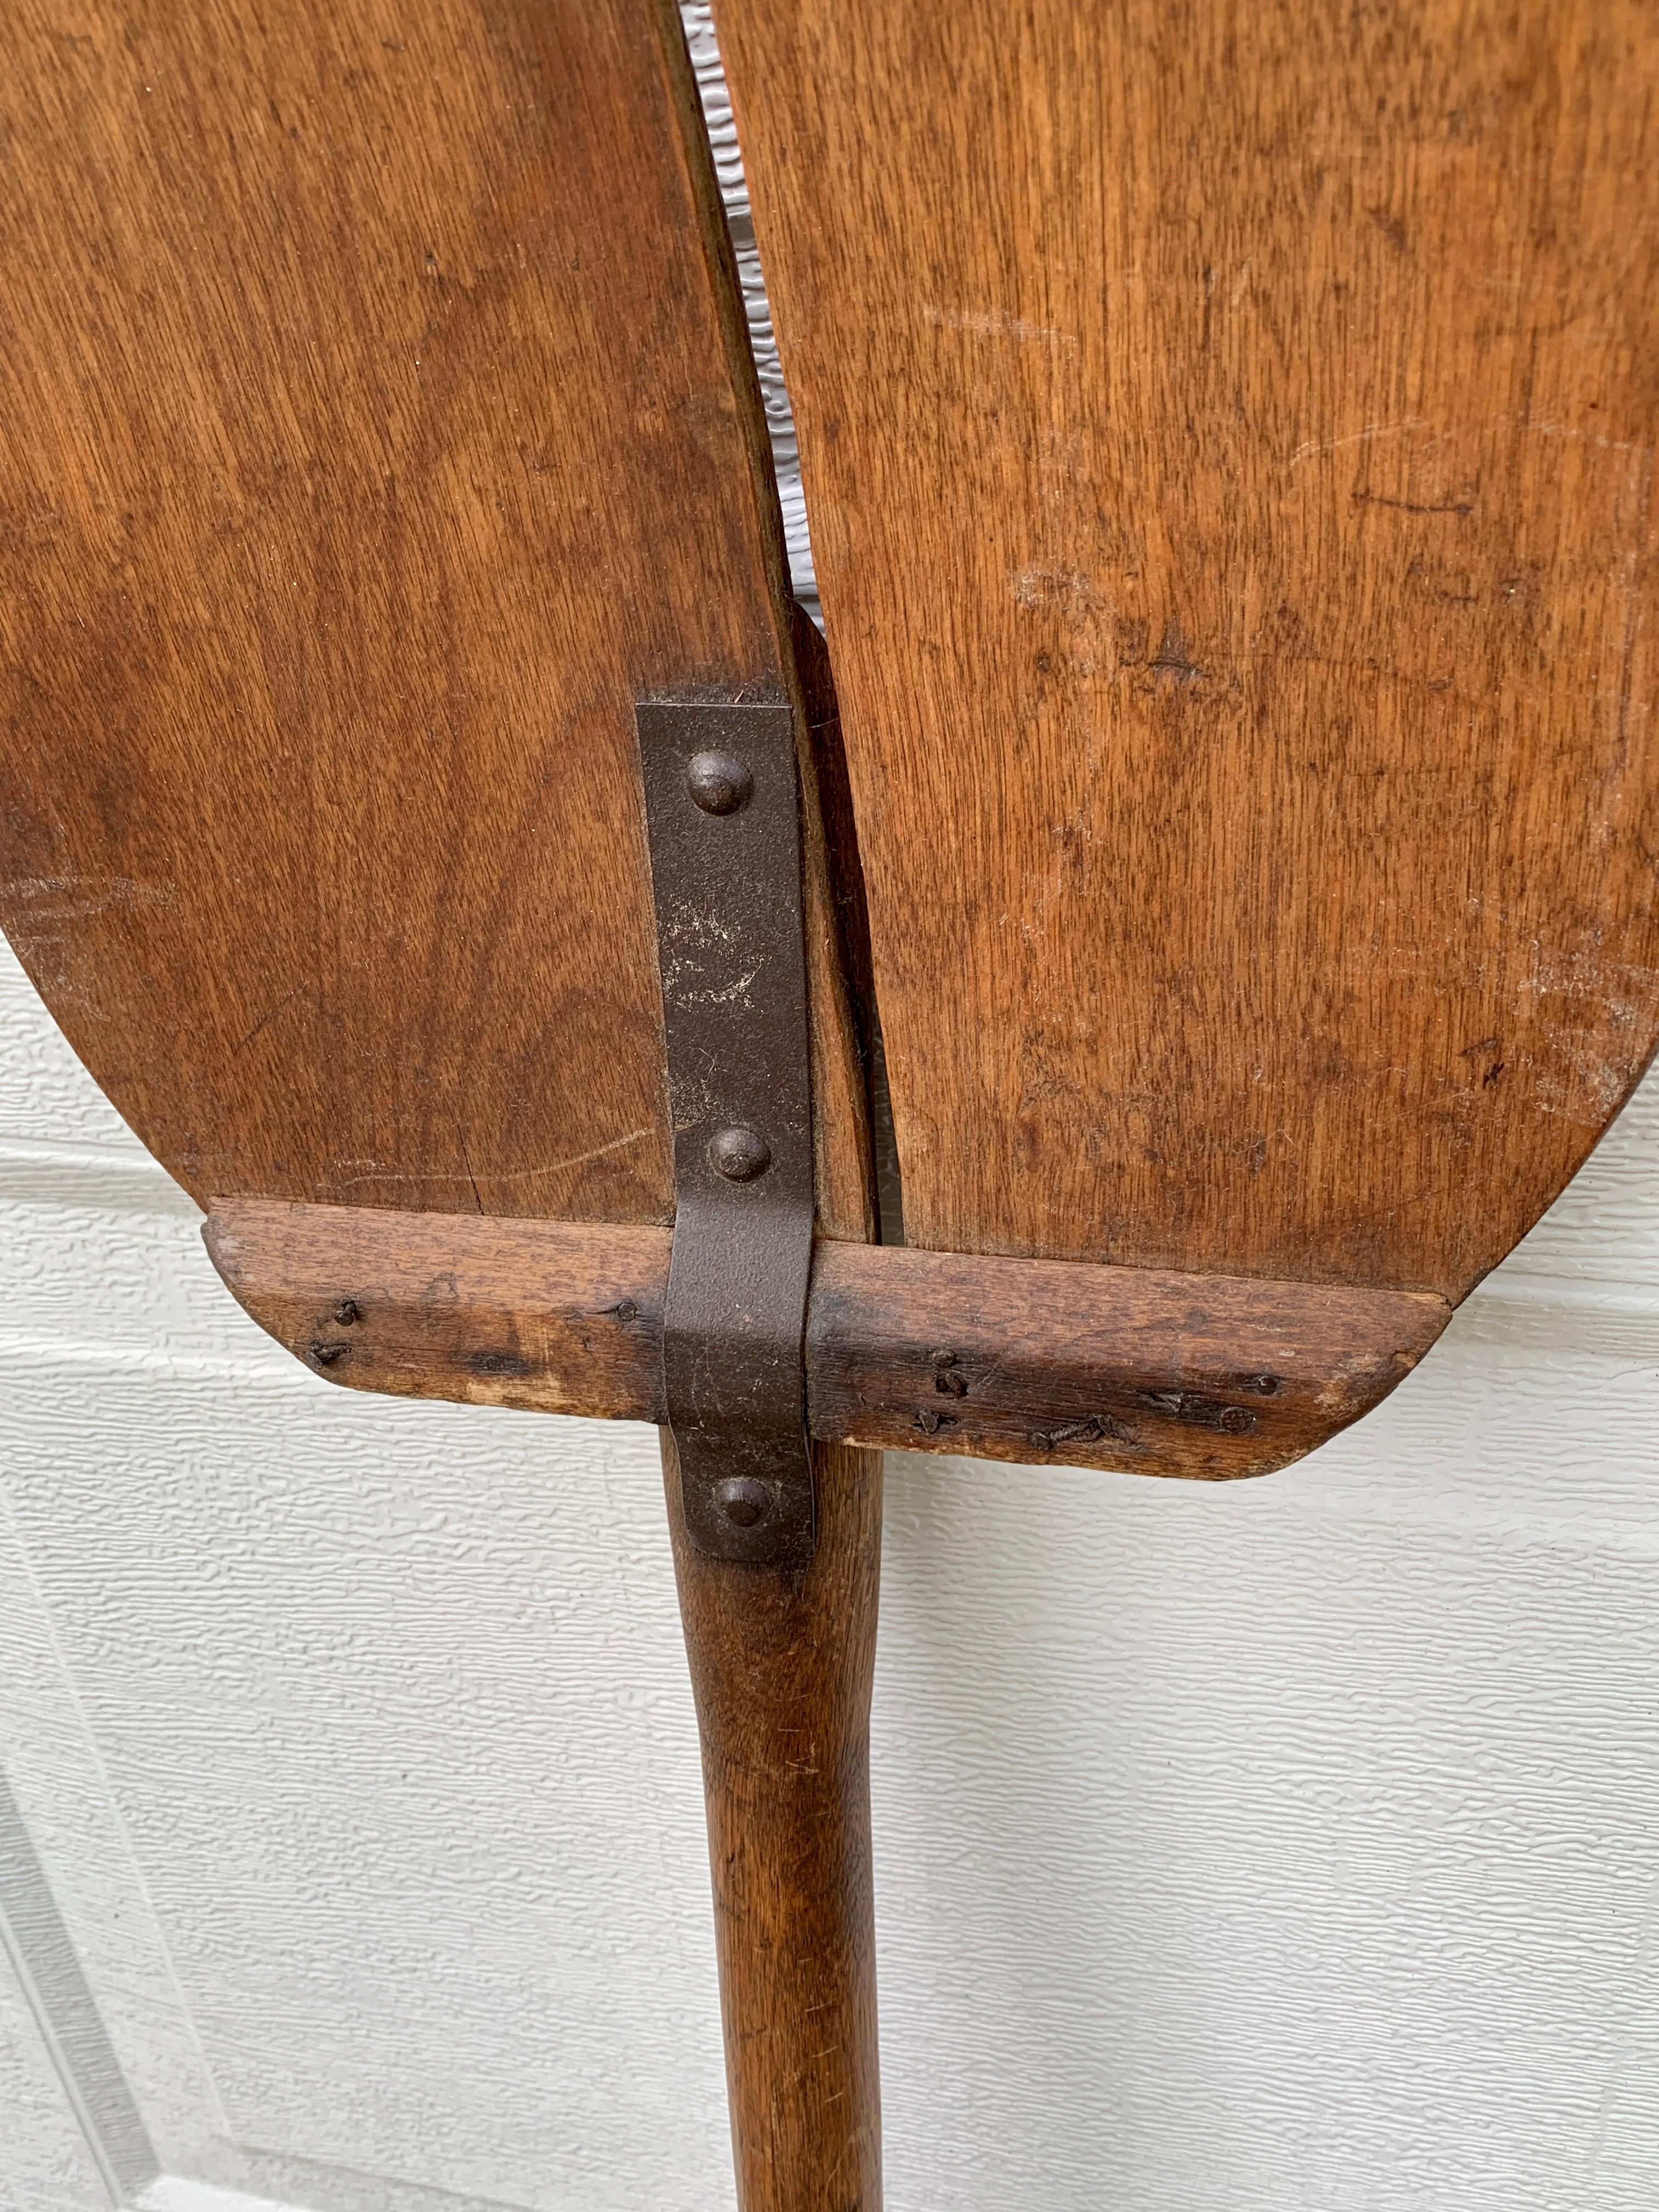 Antique 19th Century Hand Made Wooden Grain Shovel In Good Condition For Sale In Elkhart, IN